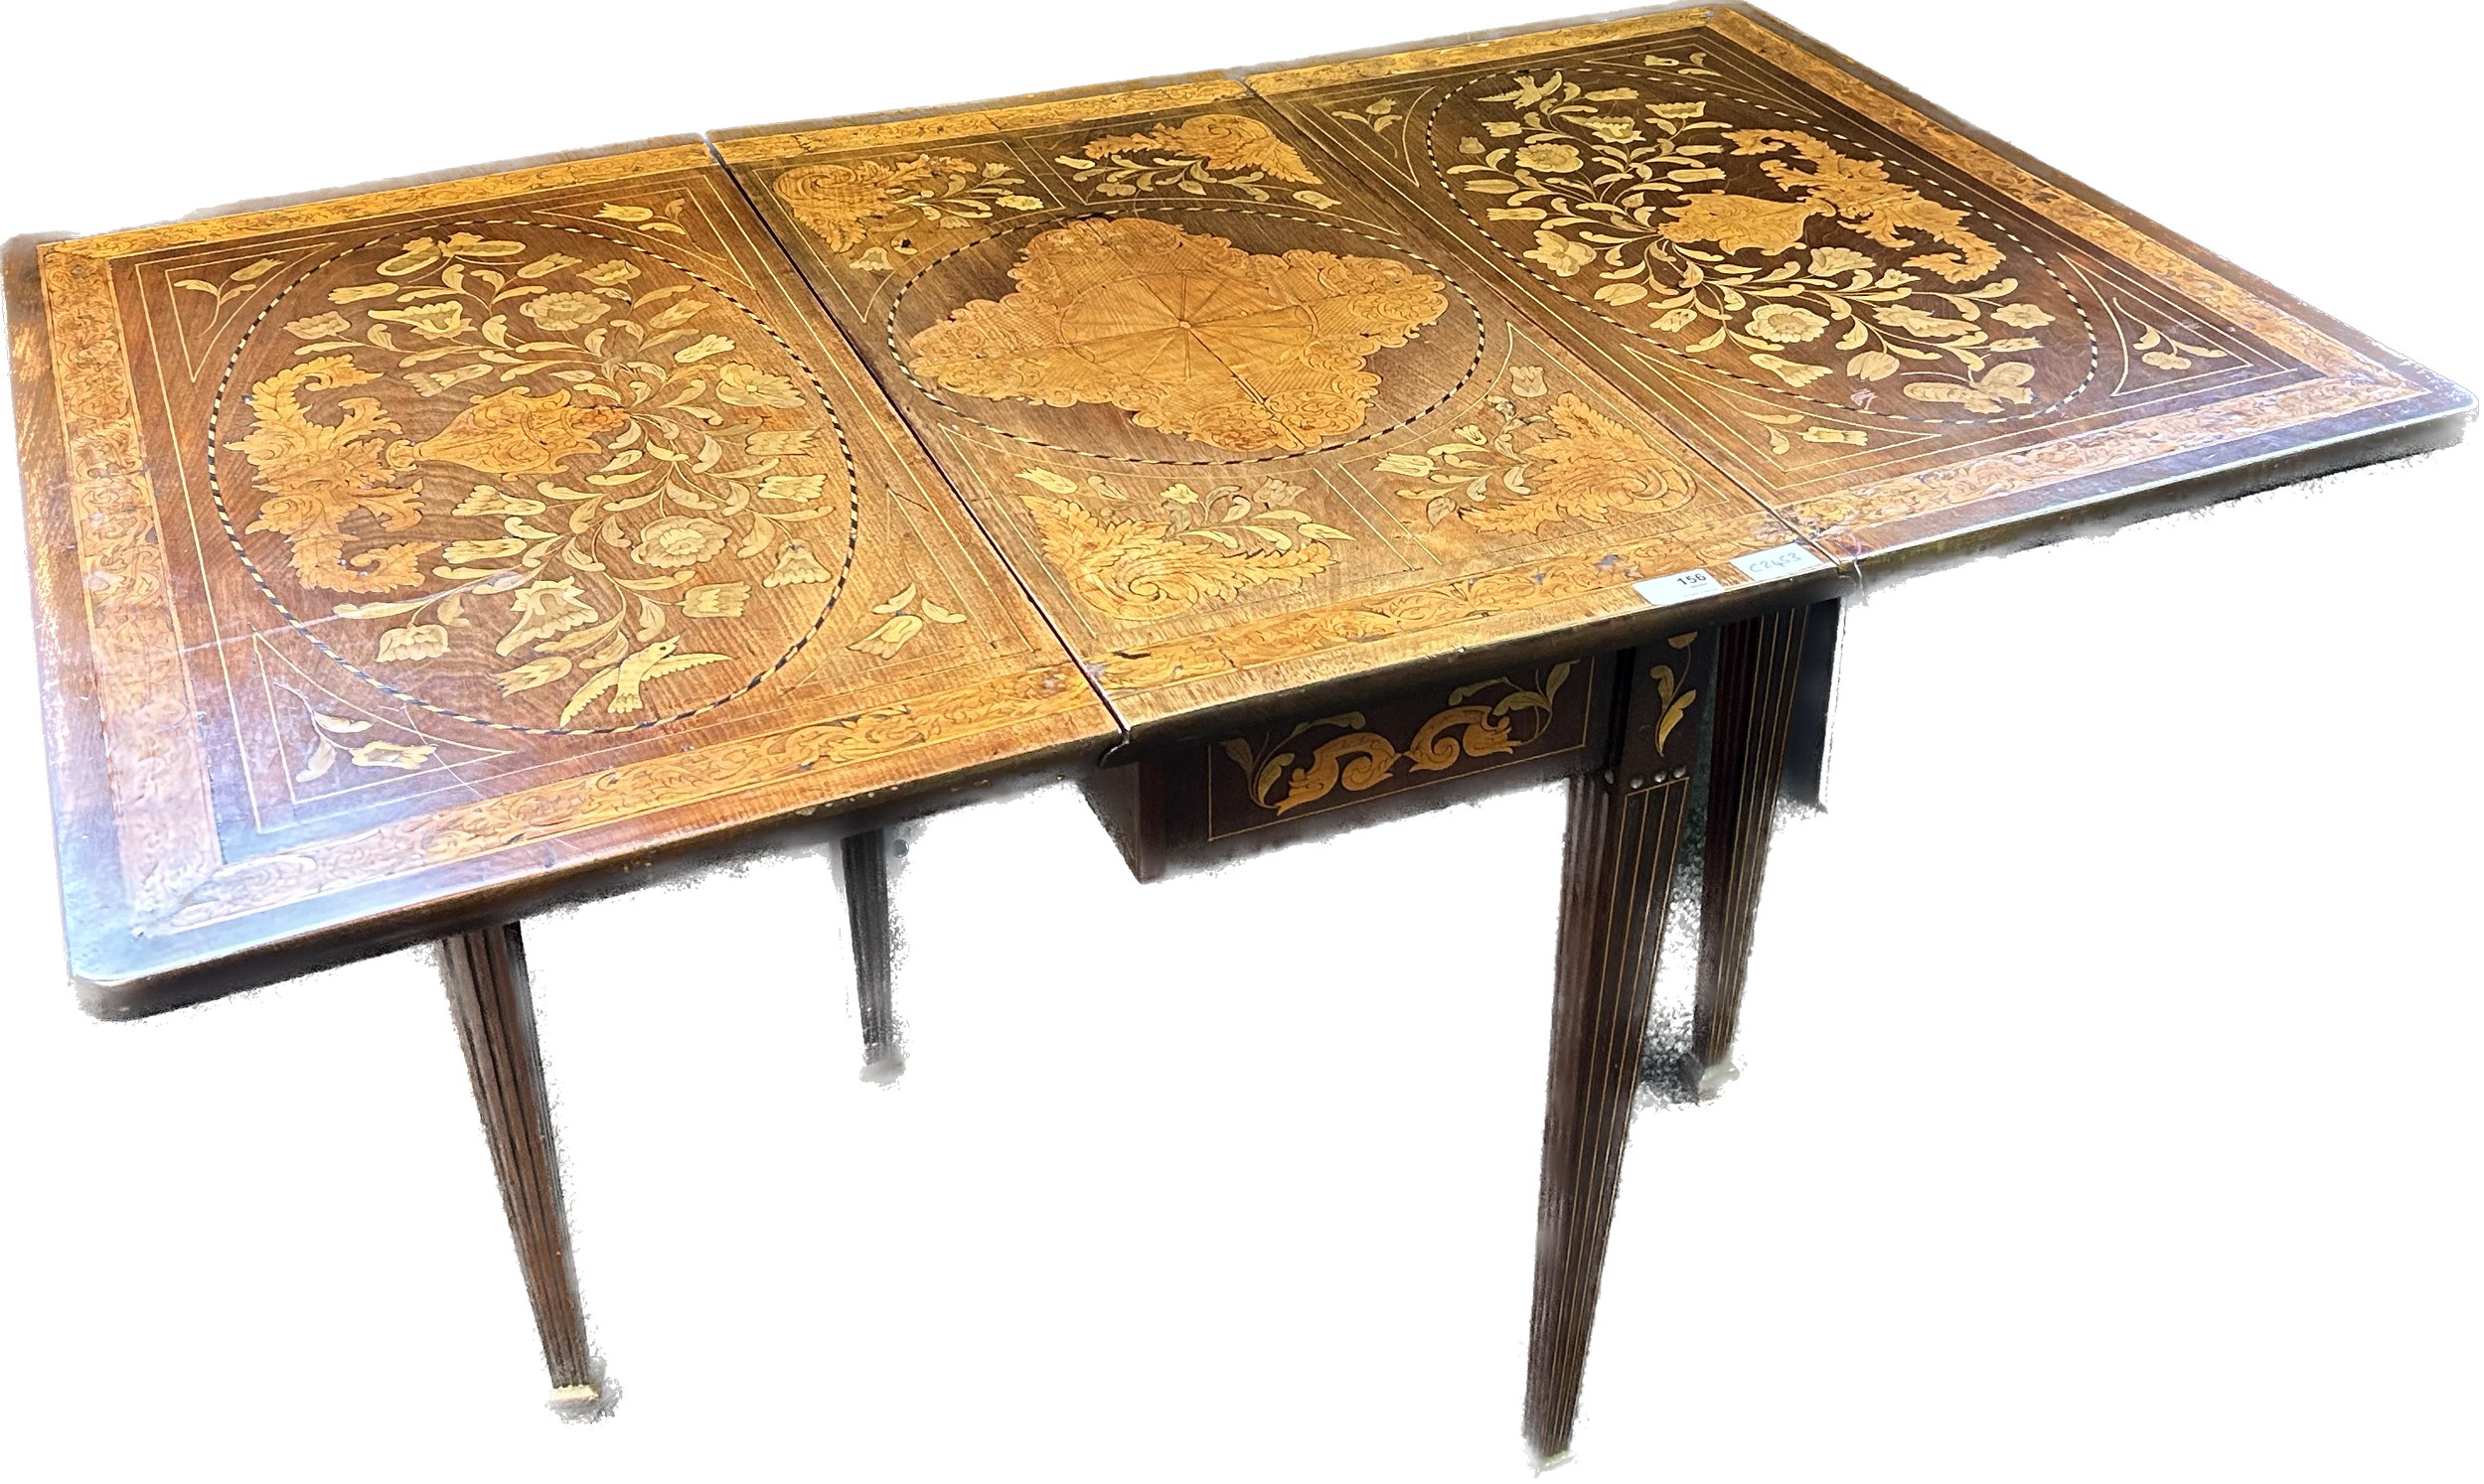 19th century Dutch table, the drop ends raising to a marquetry surface, the base with further - Image 6 of 8